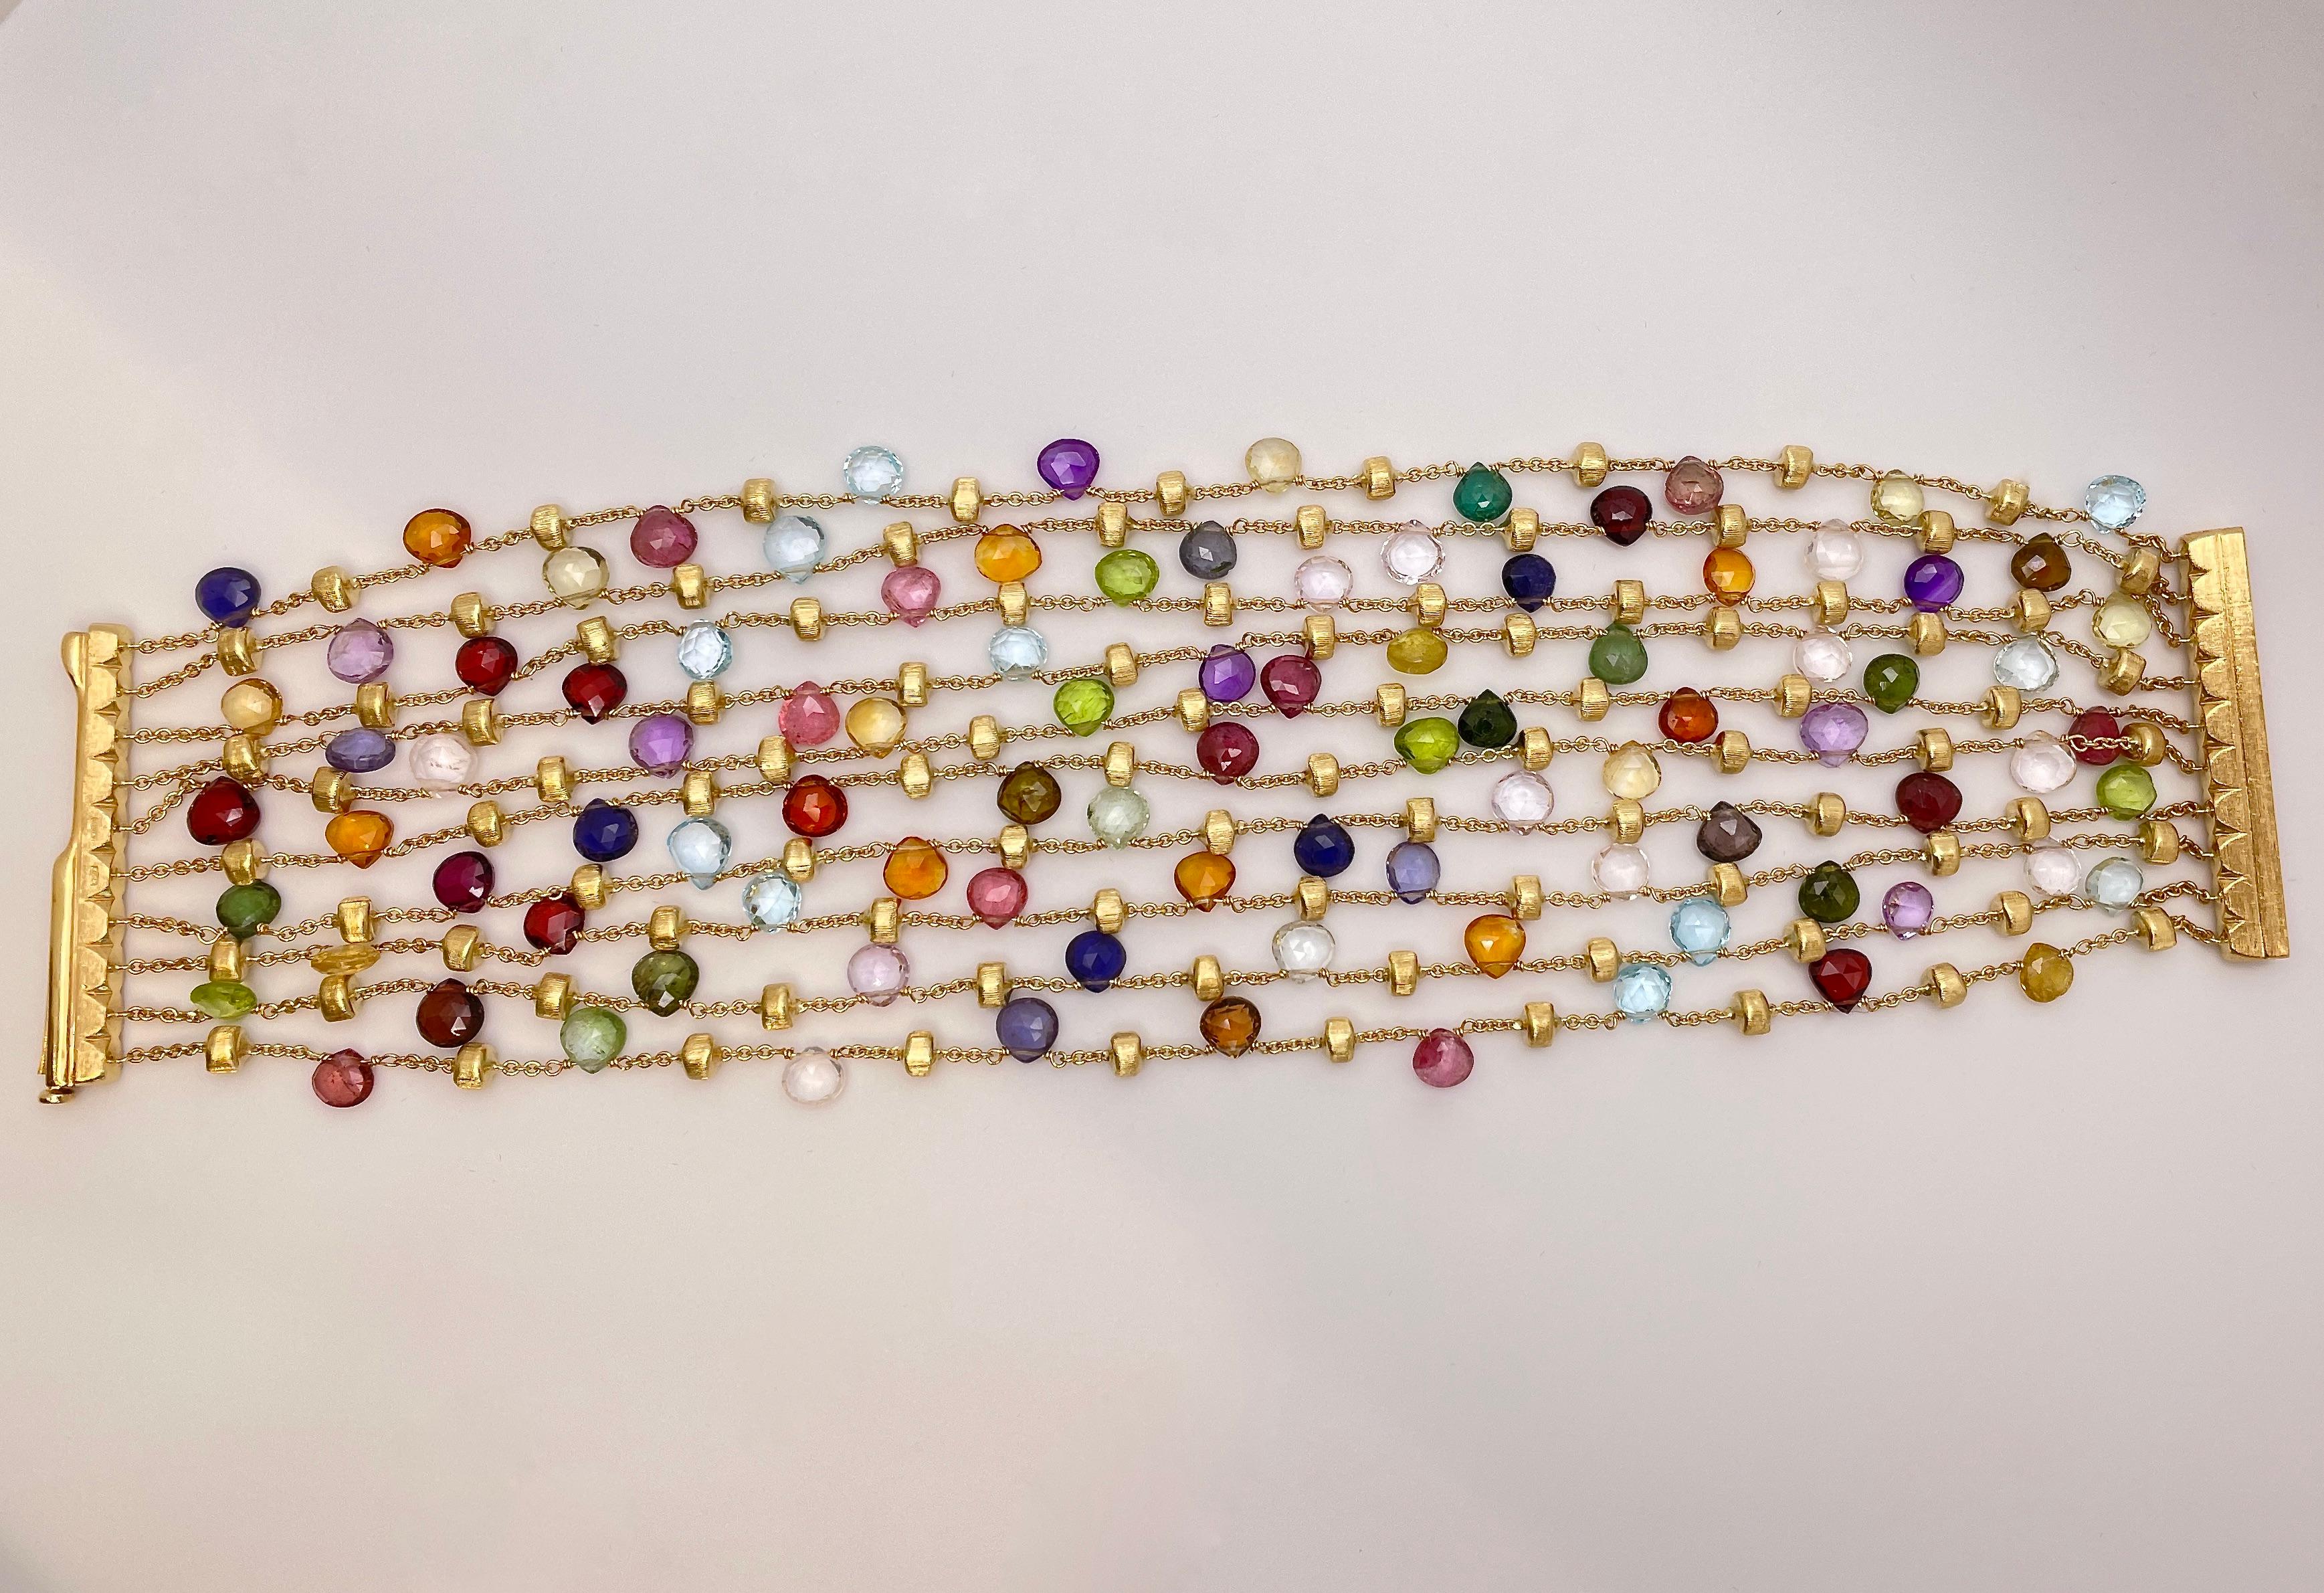 An incredible 18K yellow gold Marco Bicego multi-color stone strand bracelet. The wide range of colors emanating from these beautiful gems creates an entrancing and heavenly display. With a length of 8 inches and 10 different strands (1.50 inches